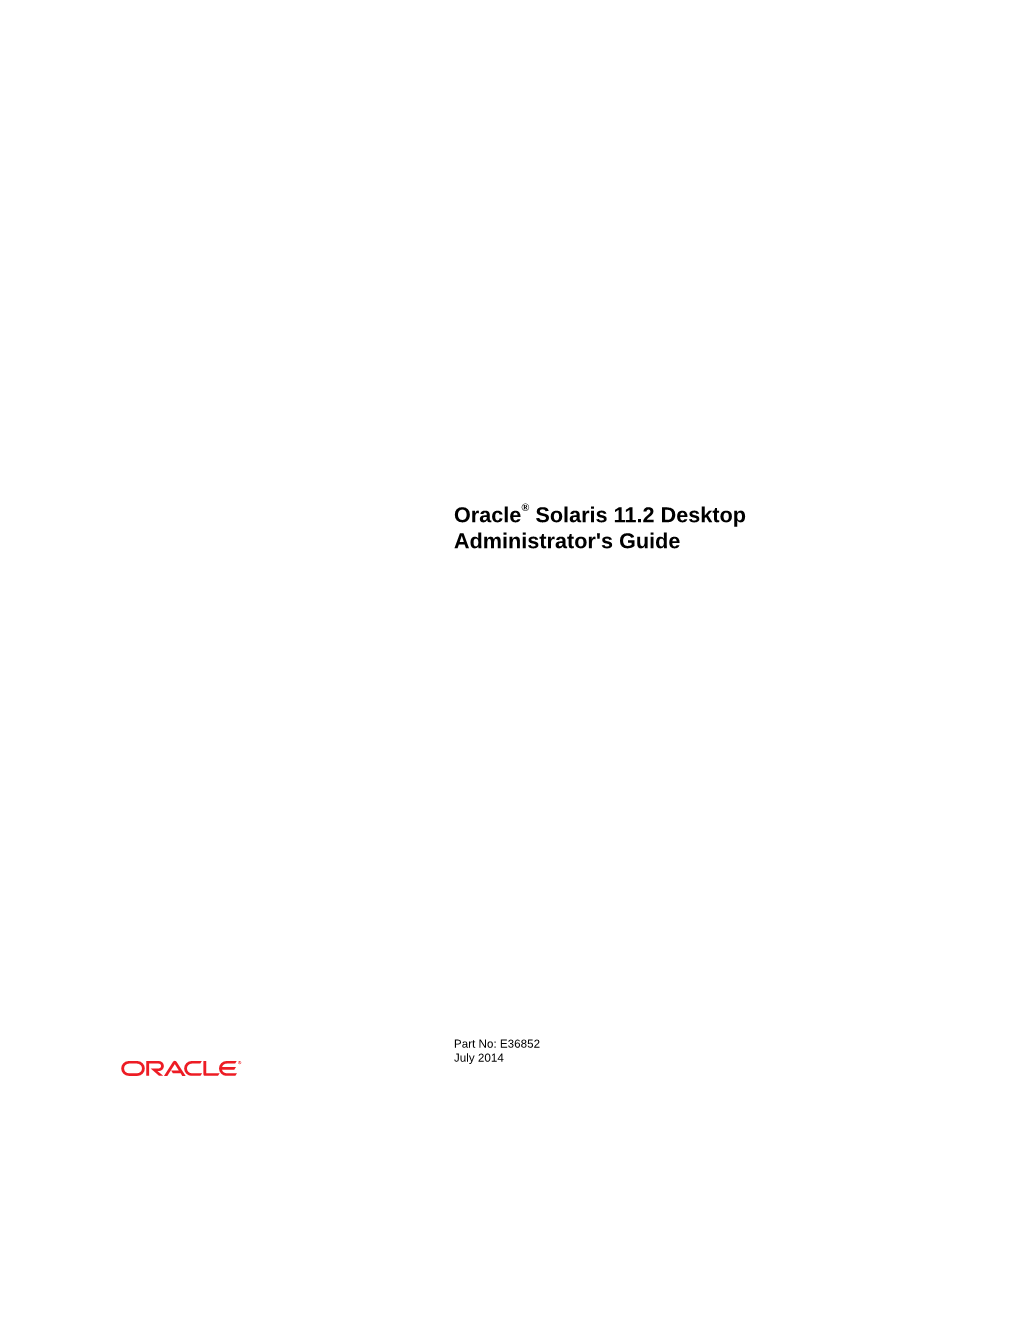 Oracle® Solaris 11.2 Desktop Administrator's Guide Describes How to Administer Systems Running the Oracle Solaris Desktop